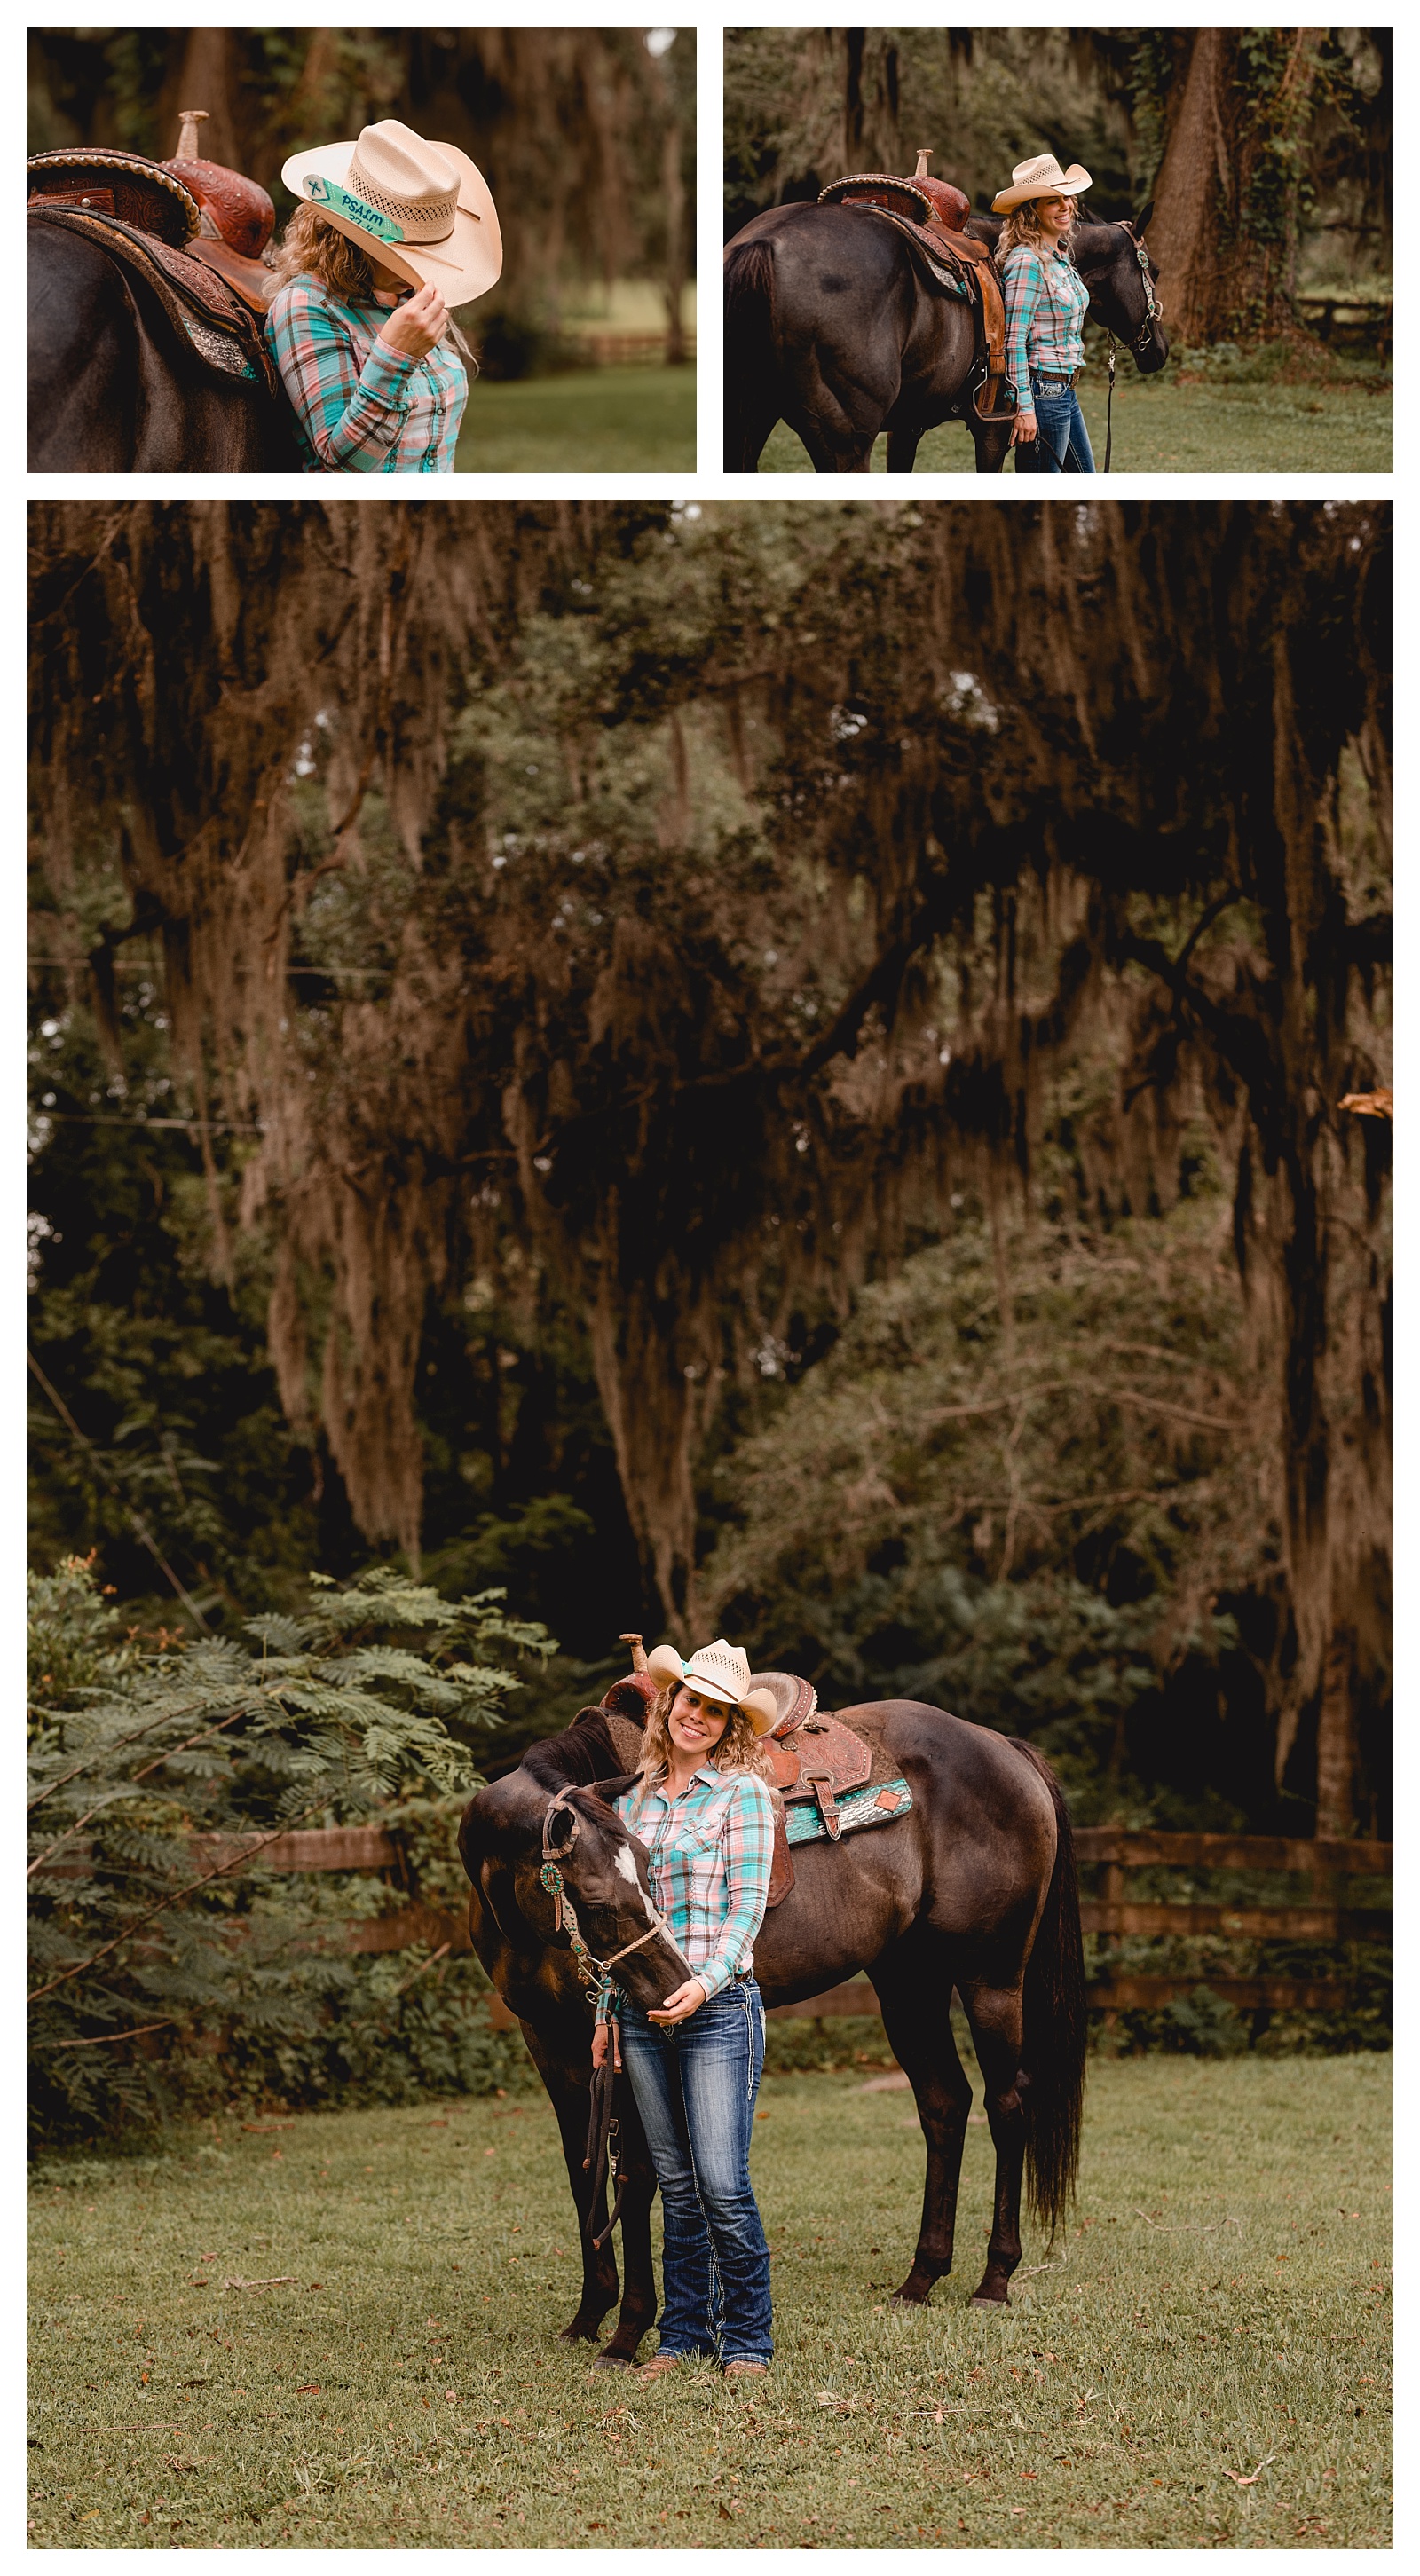 Equestrian photography by Shelly Williams traveling from Tallahassee area to Ocala area and beyond. 